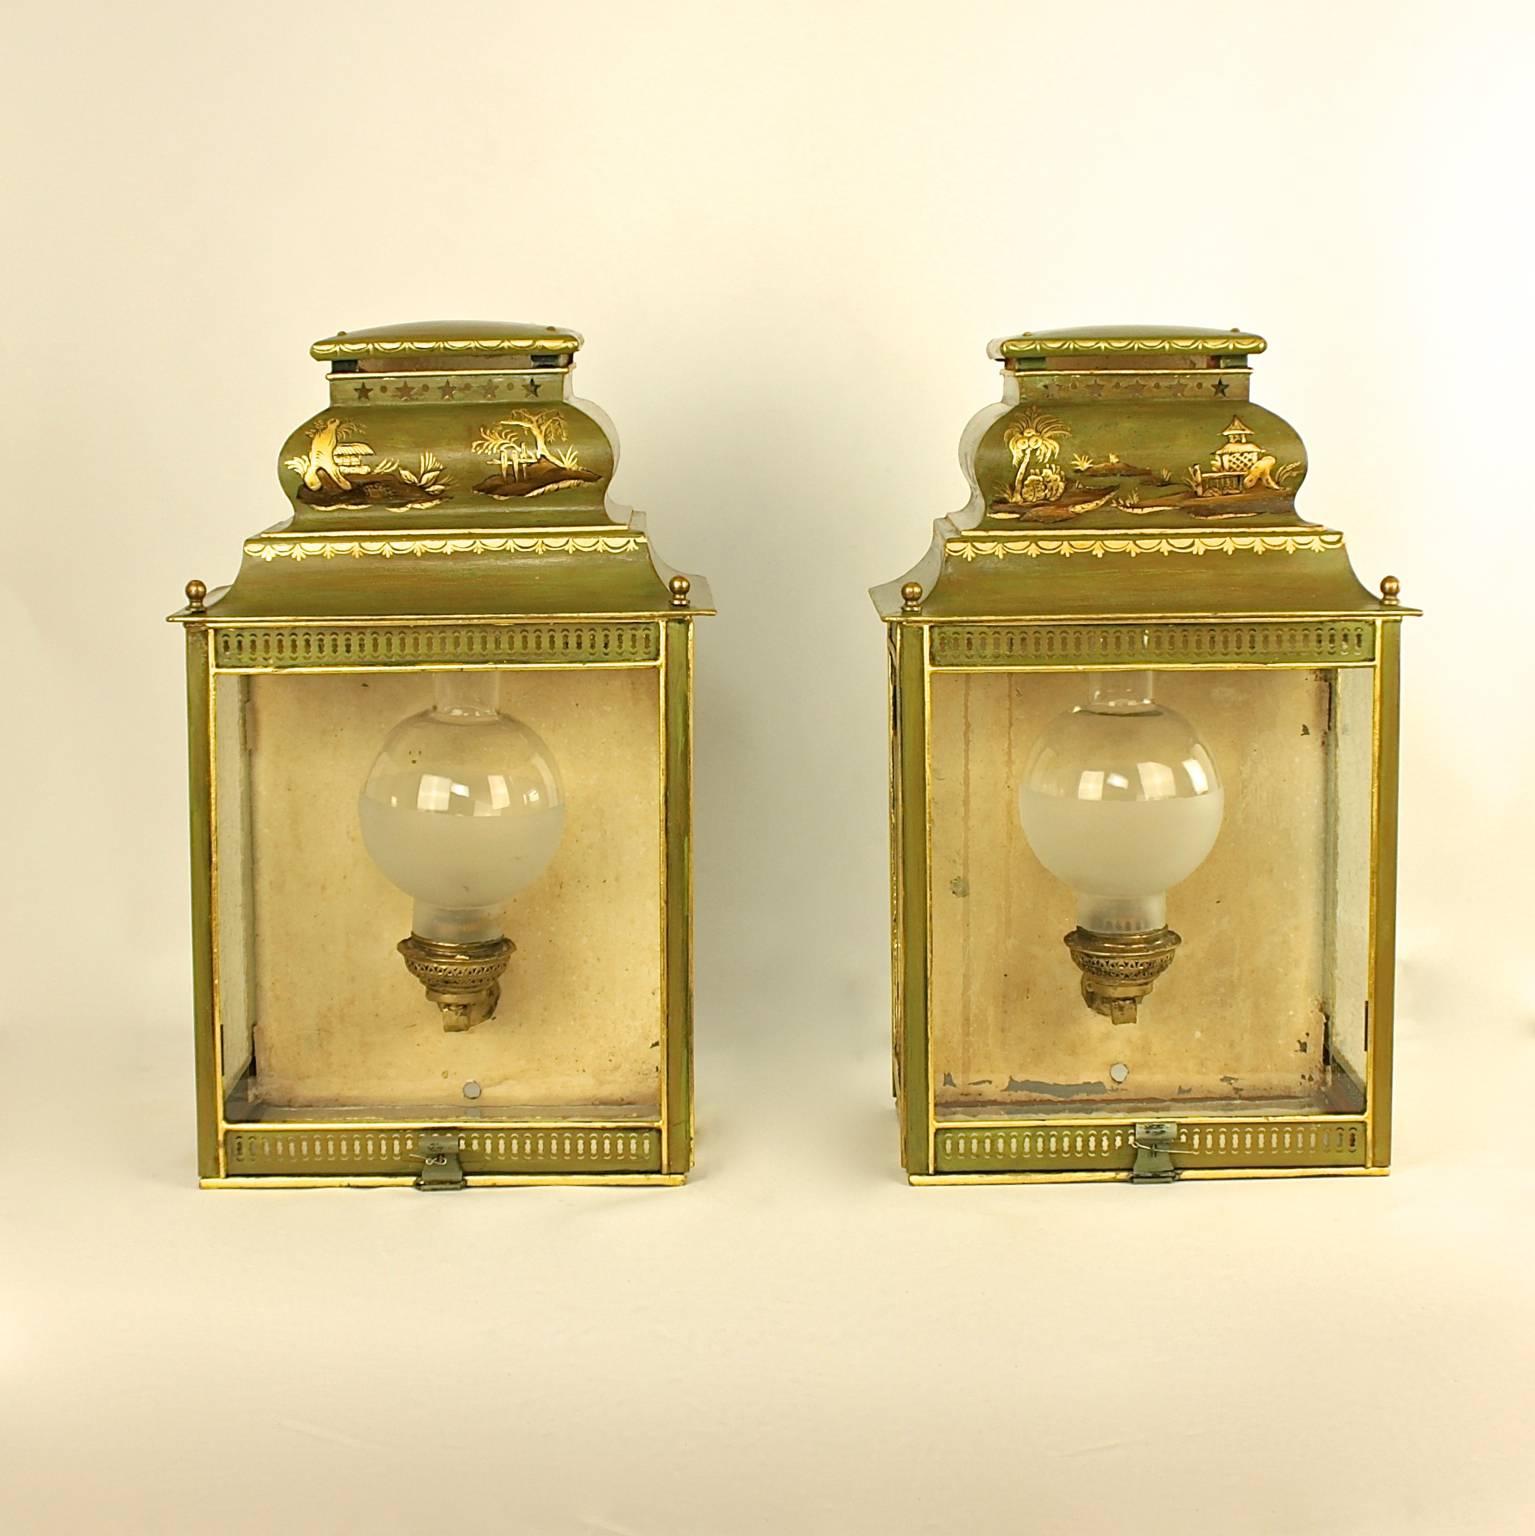 A Pair of green and gilt tole wall lanterns decorated with beautifully painted gilded Chinoiserie design of landscapes with palm trees, pagodas, rocks and flowers. Glazed panels on front, sides and bottom. Wired for Electricity.  